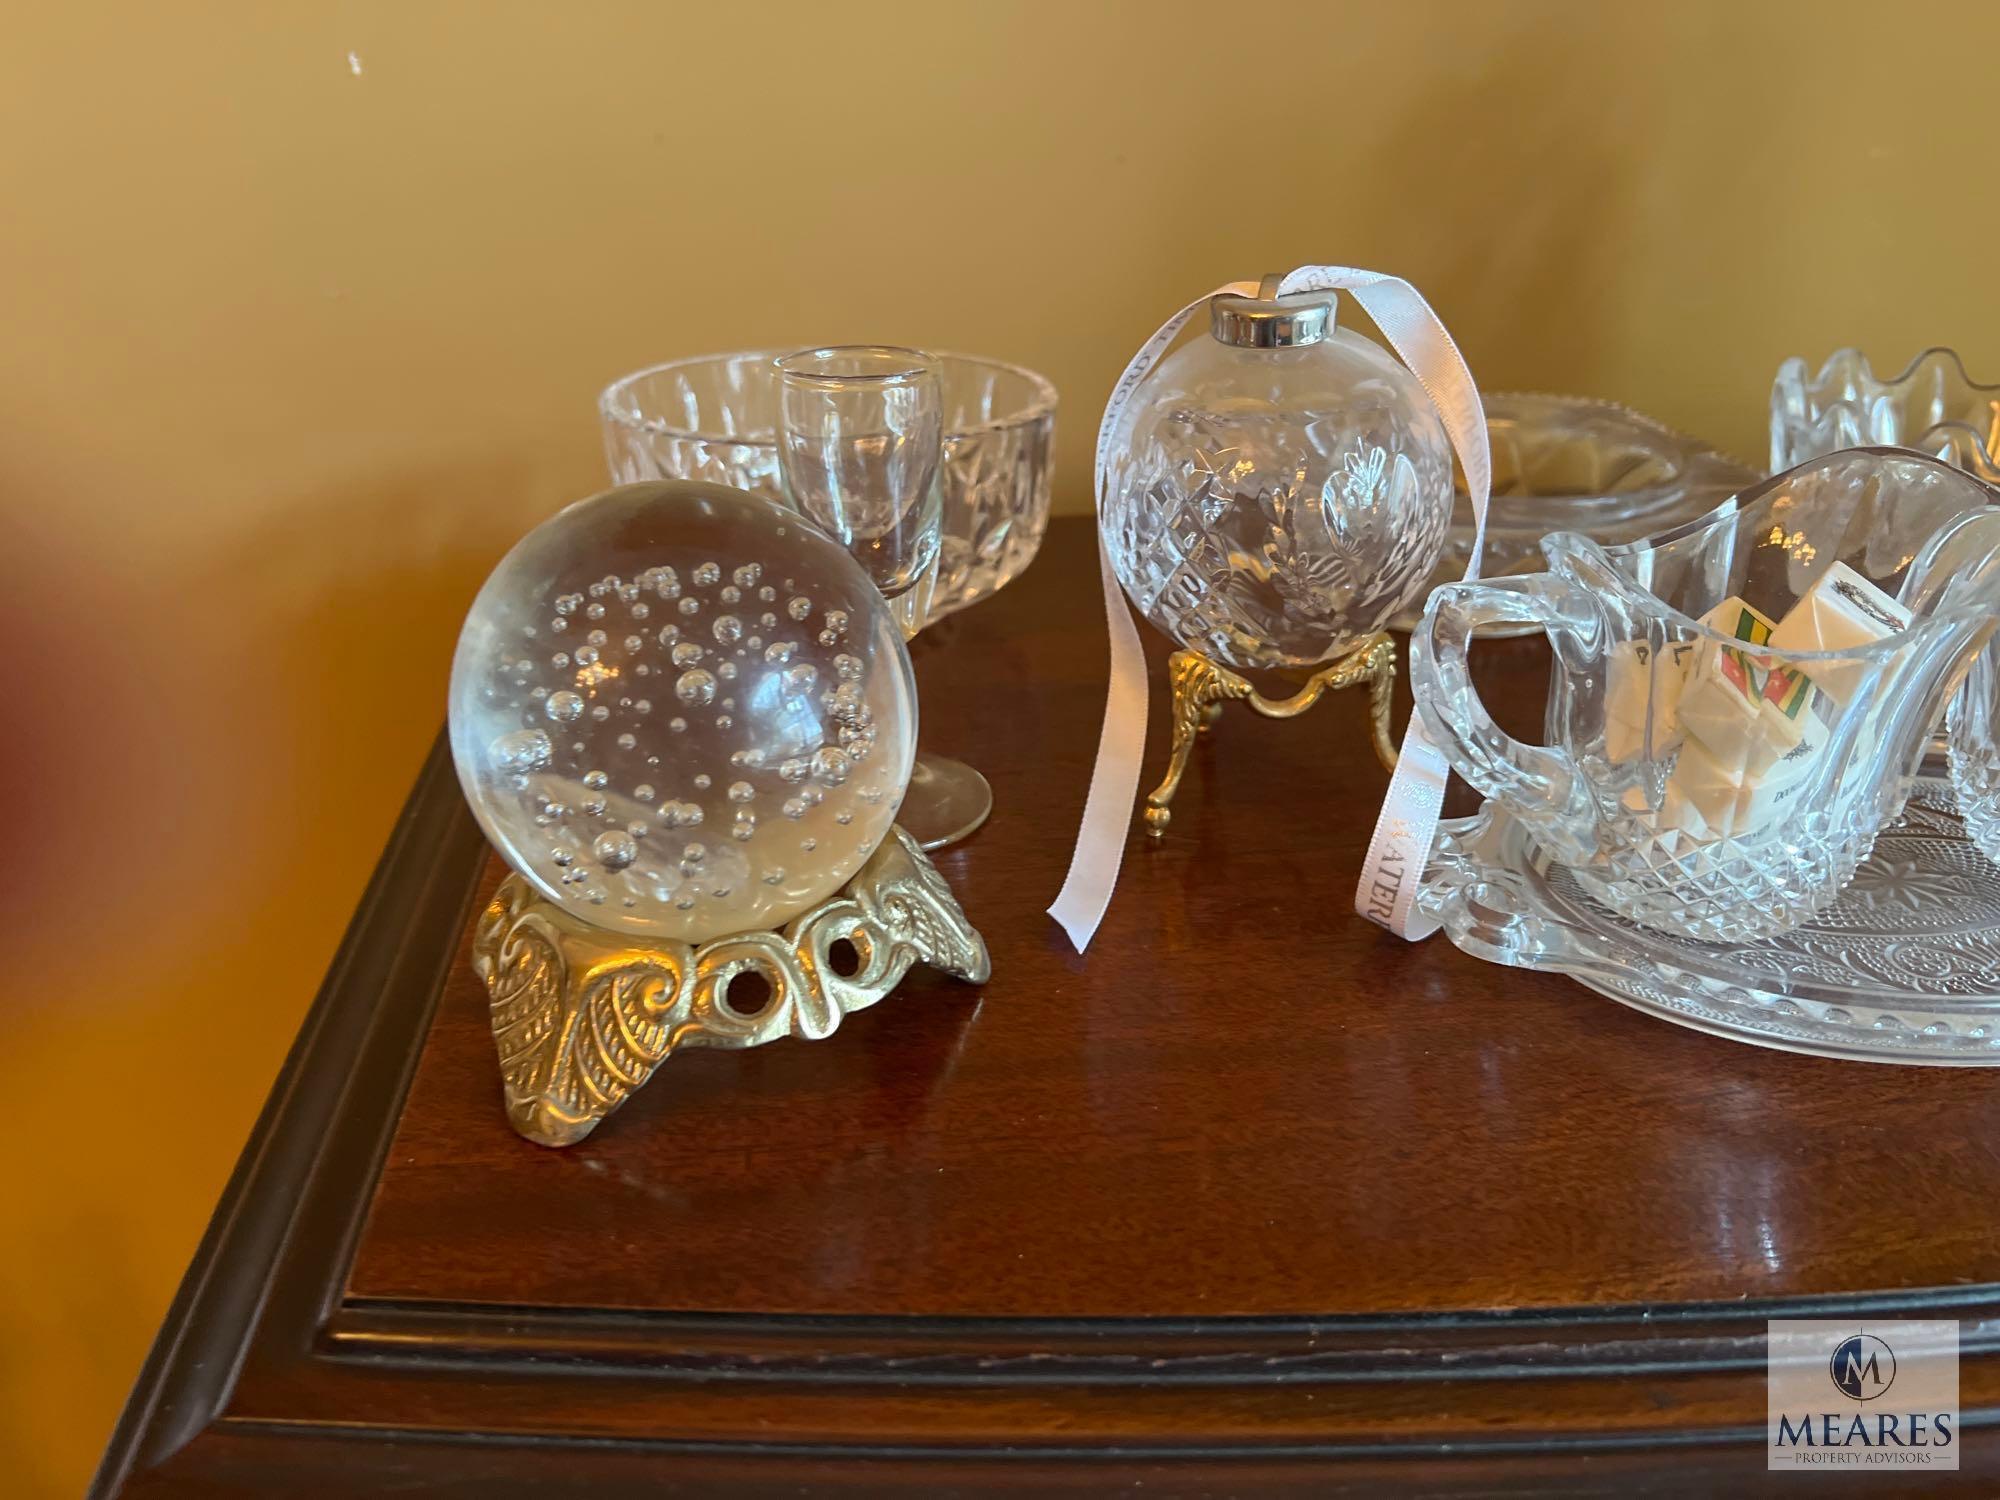 Glass Lot with Pitcher, Stem Glasses, Cream and Sugar